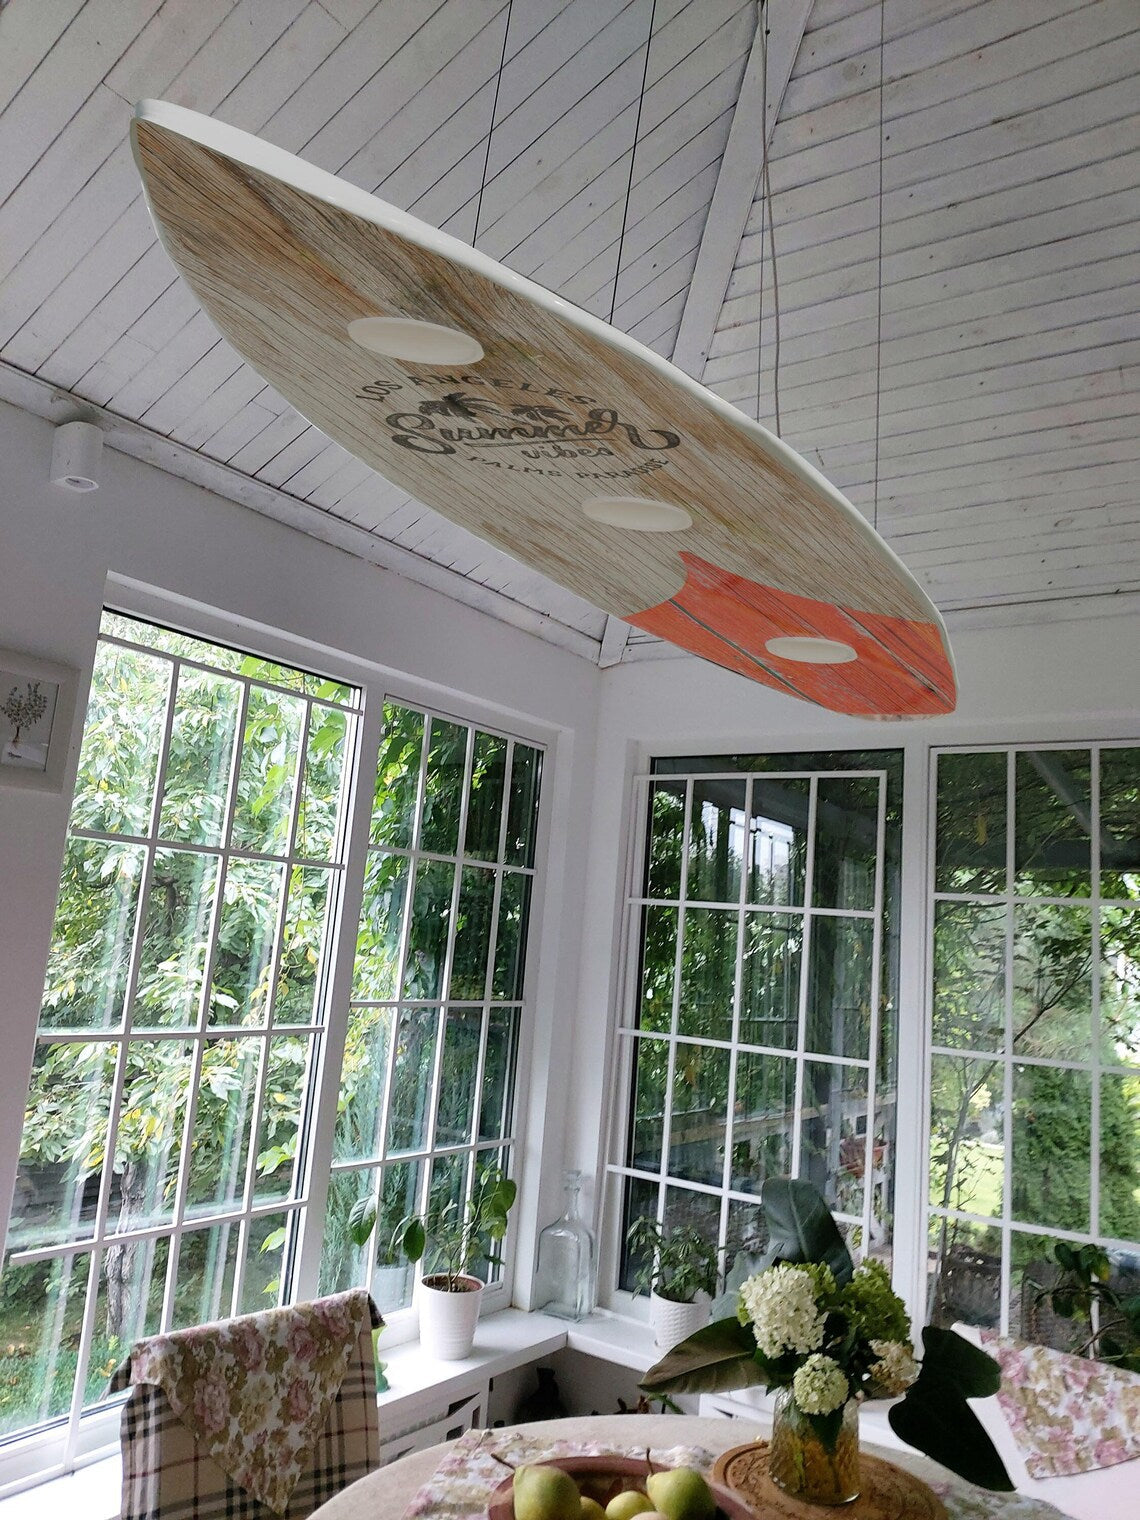 60 and 72 inch Surfboard Shaped Ceiling Chandelier - Pool Billiard Table Light